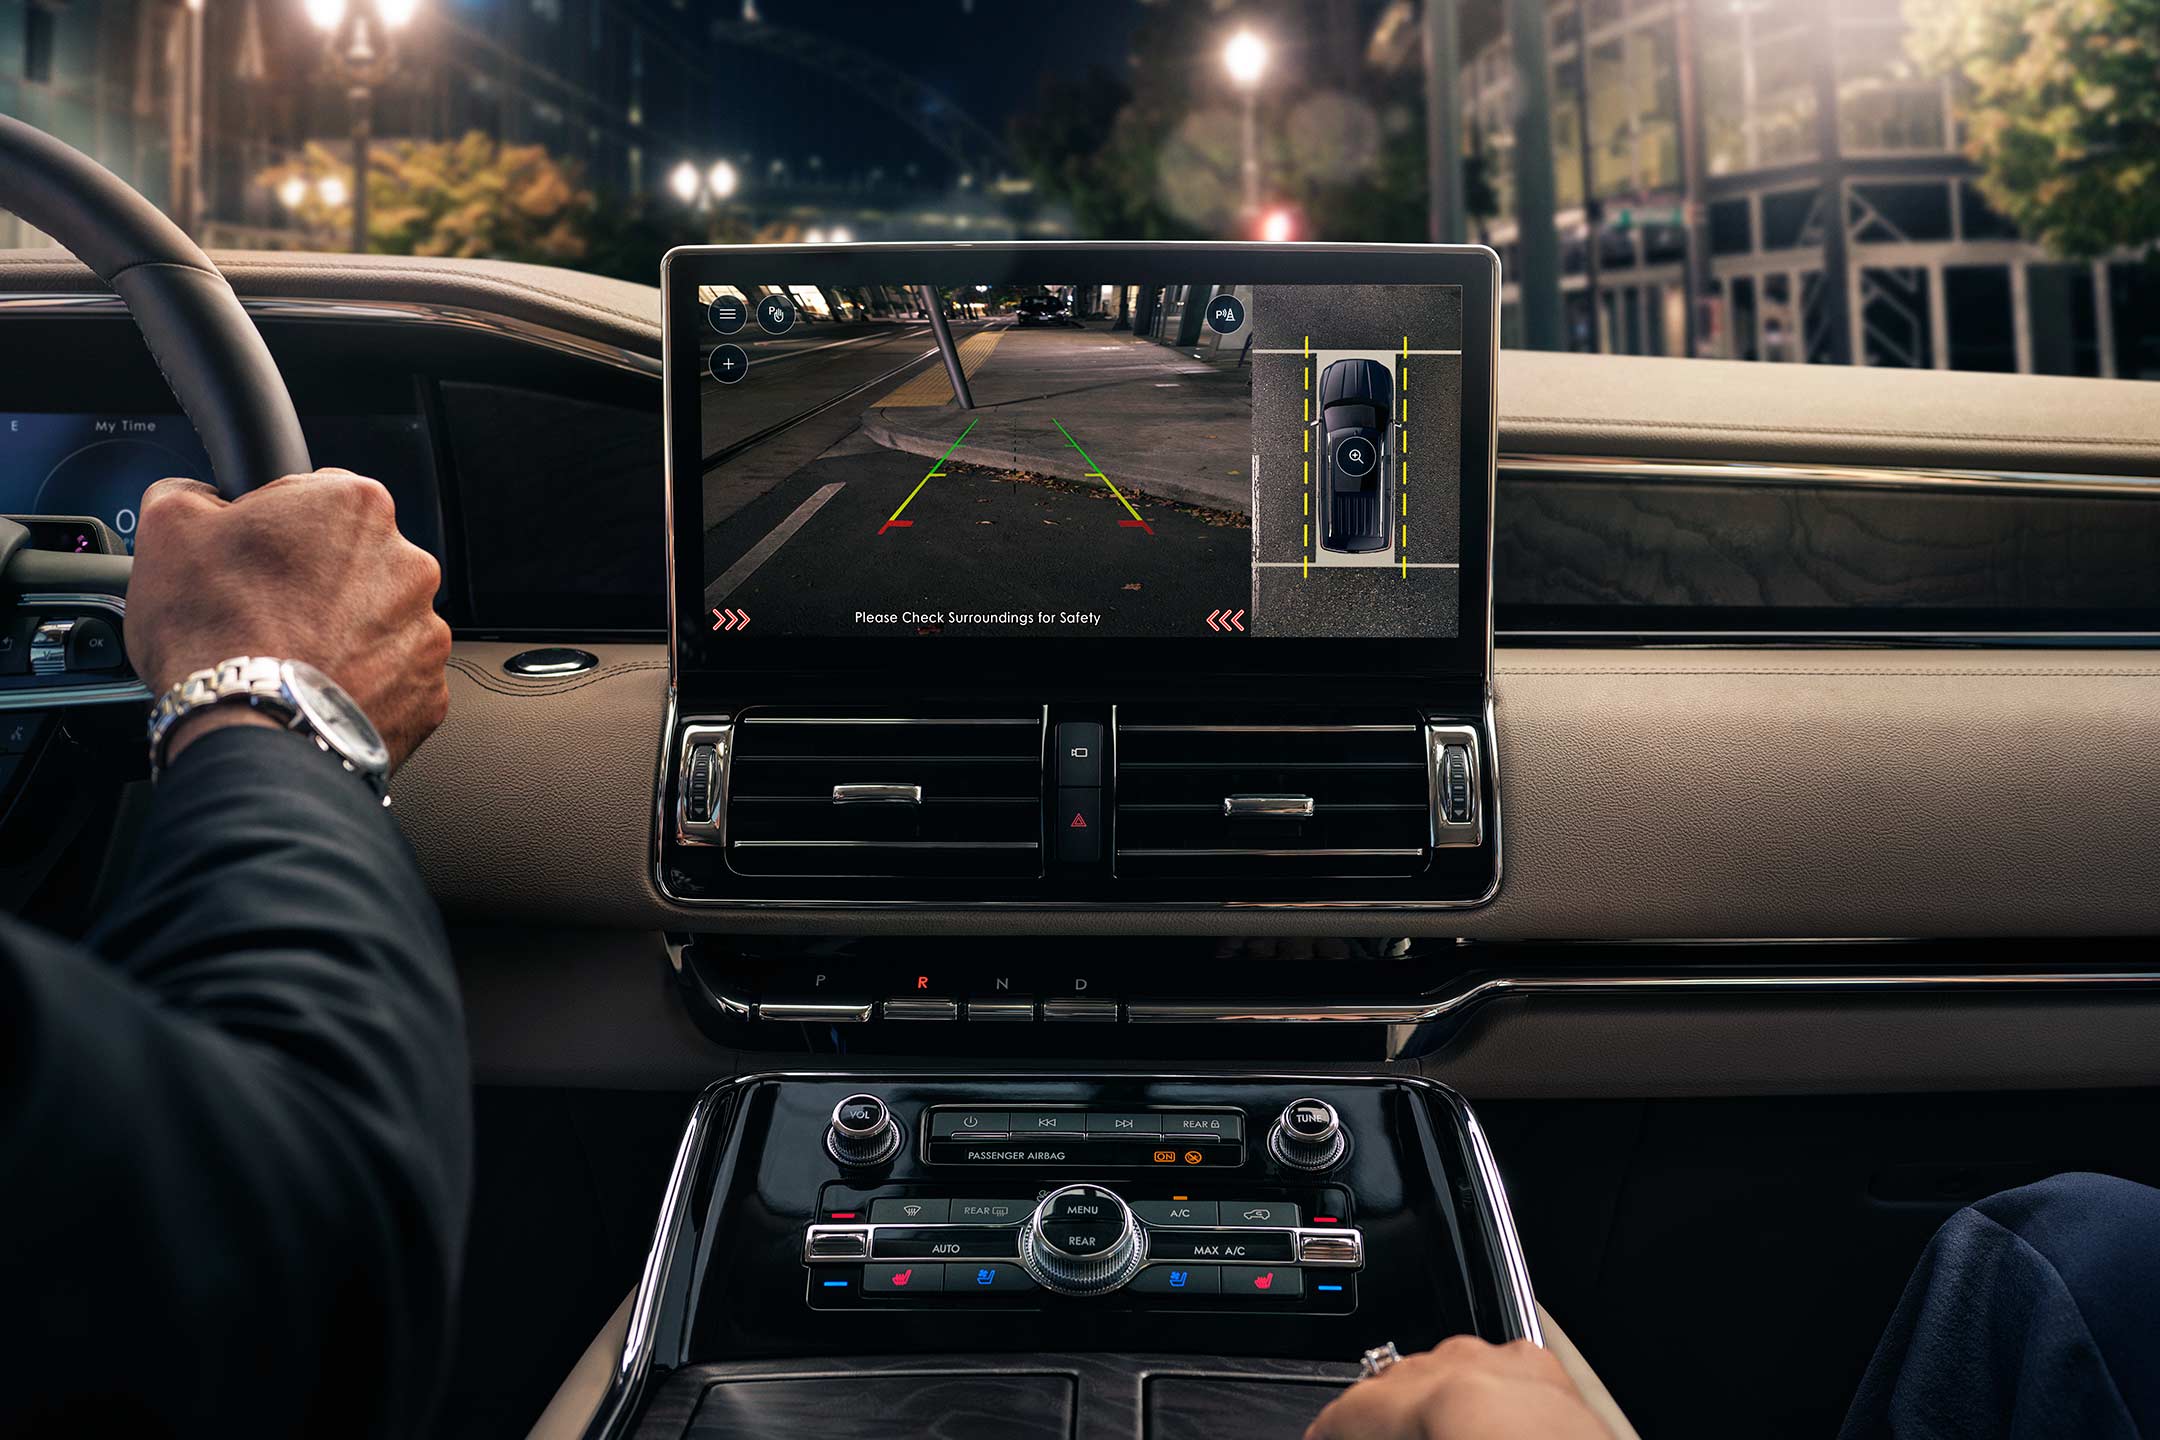 The 360-Degree Camera display on the center screen shows the rear and overhead view of the vehicle.